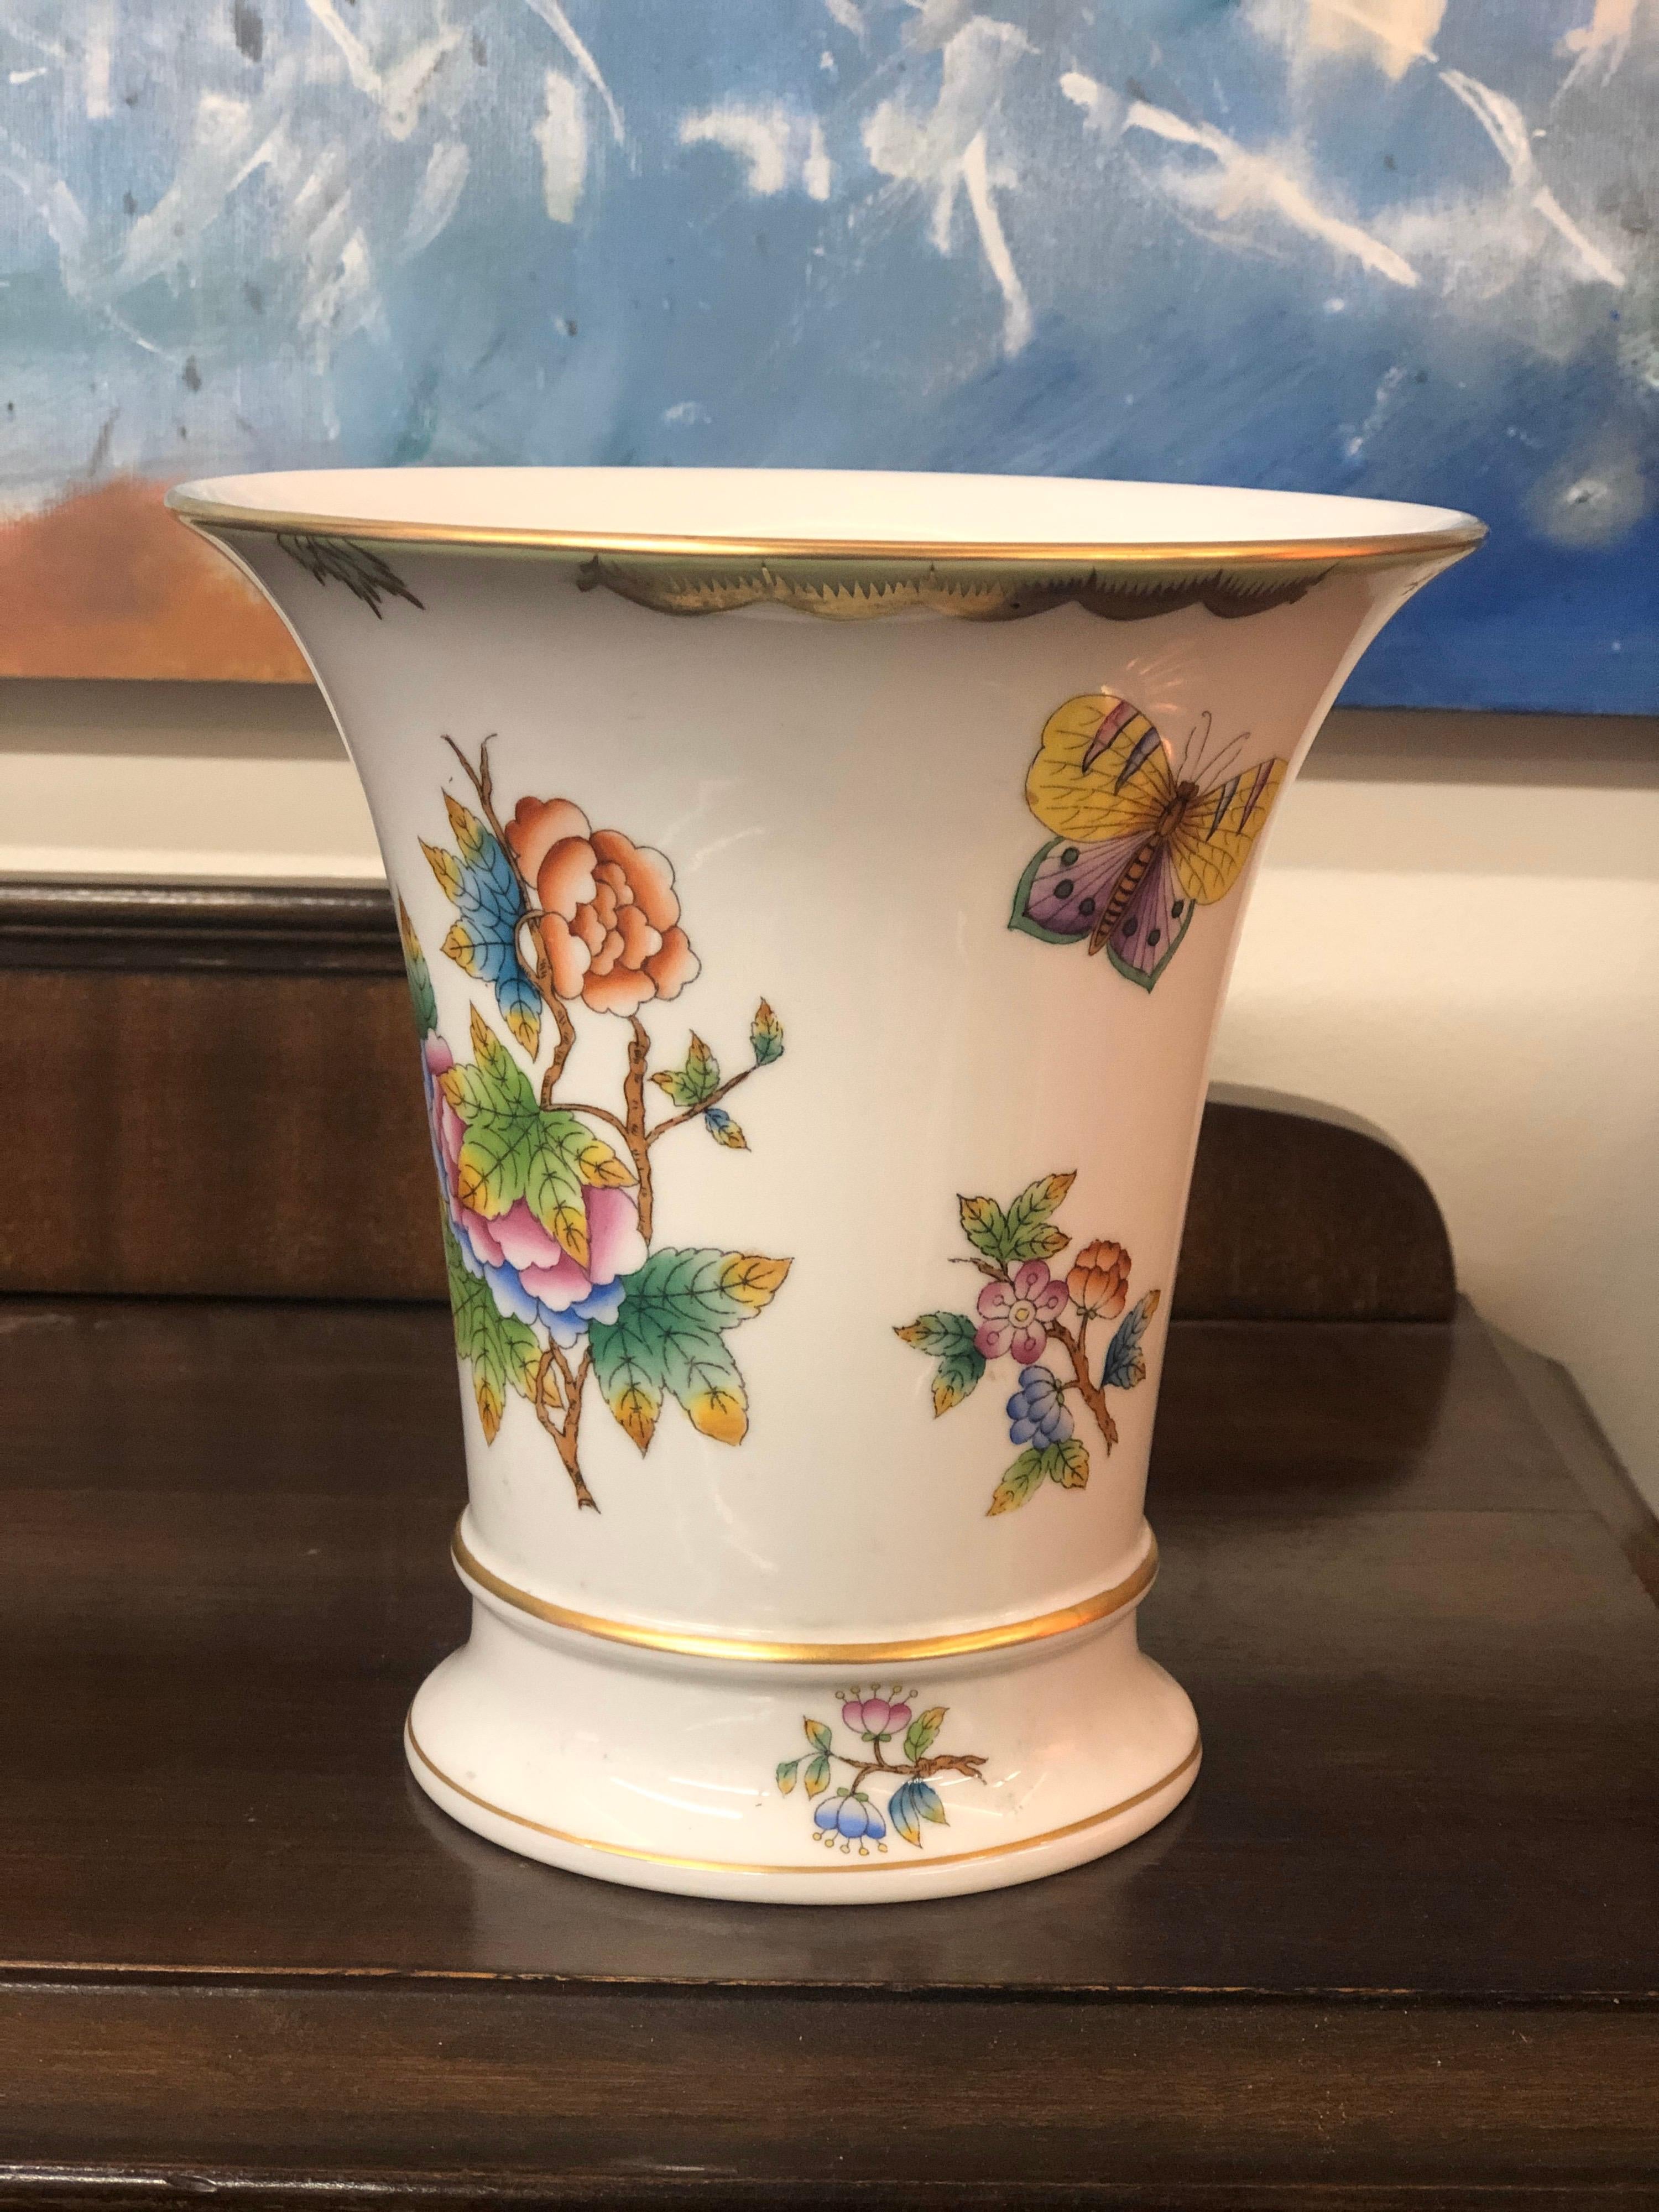 Vintage Herend Queen Victoria vase made in hand painted Fine porcelain.
Excellent condition.
Hungary, circa 1940.